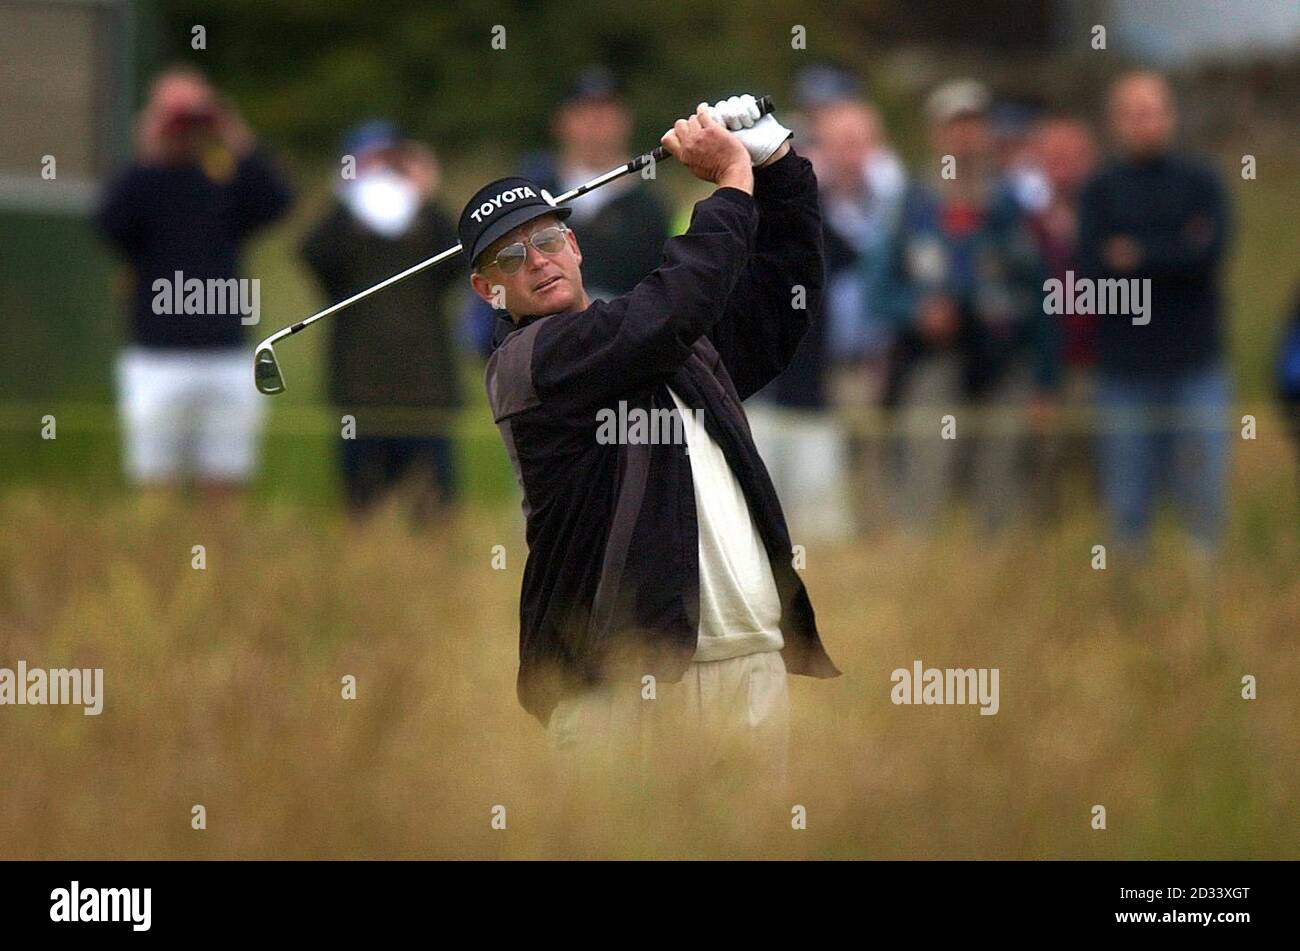 Scotland's Sandy Lyle plays a shot from the 1st fairway on the first day of the 131st Open Championship at Muirfield, Scotland.   Stock Photo